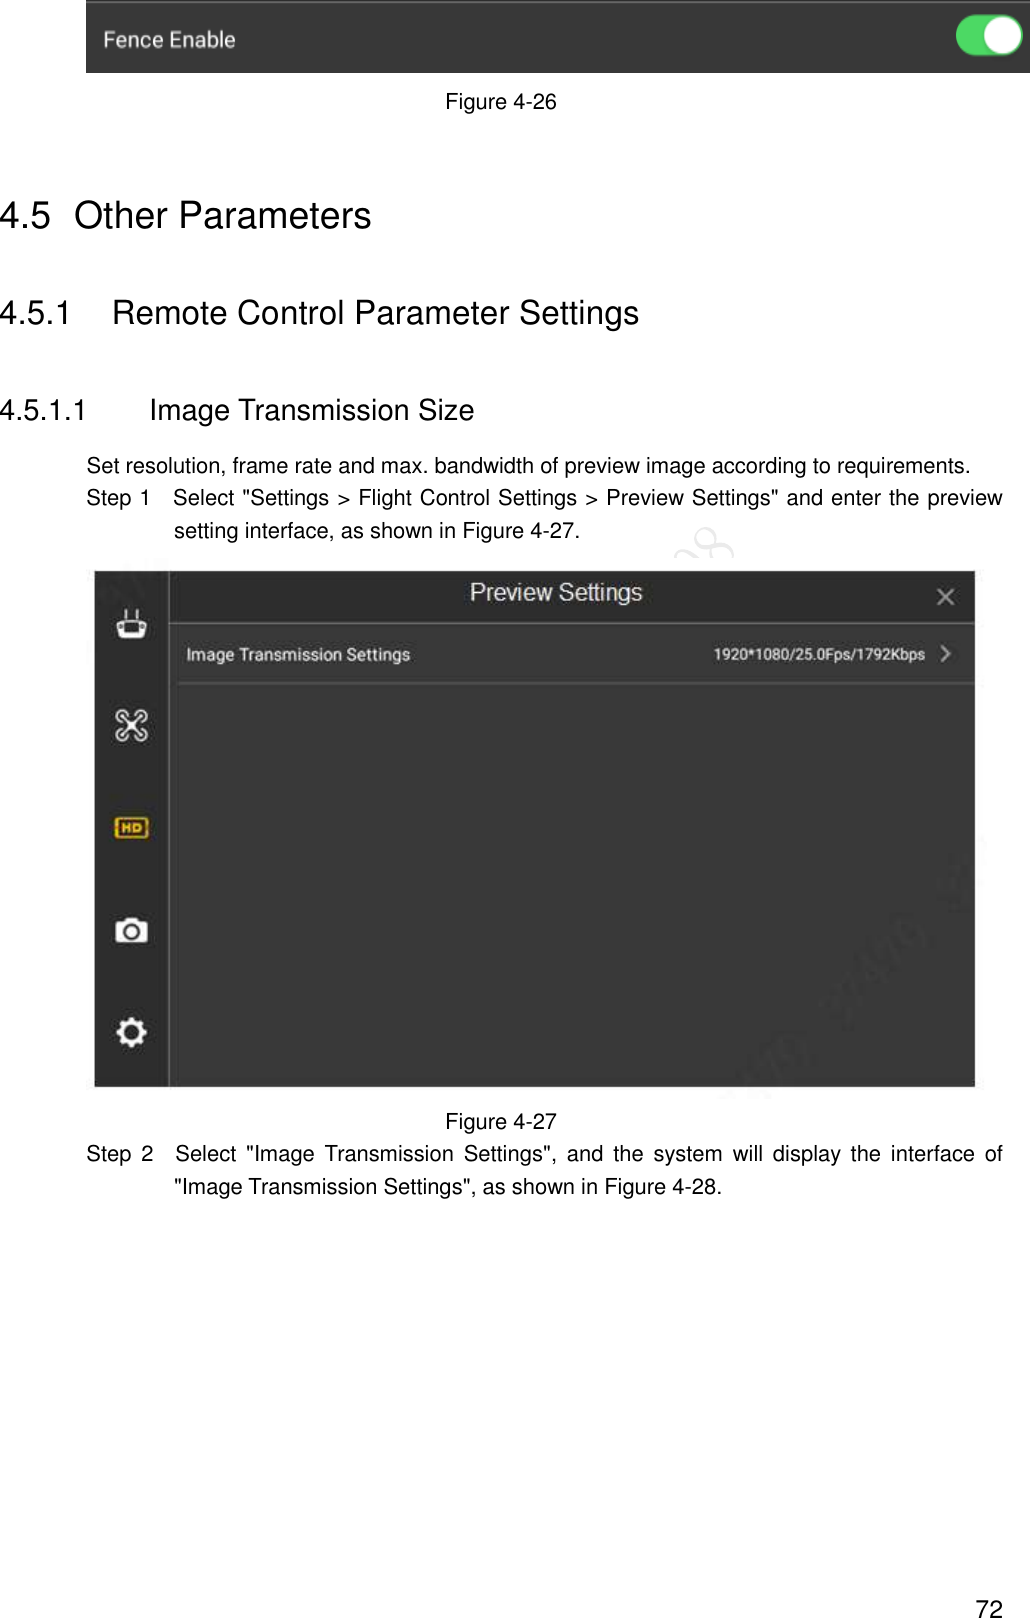  72  Figure 4-26 4.5  Other Parameters   4.5.1  Remote Control Parameter Settings 4.5.1.1  Image Transmission Size Set resolution, frame rate and max. bandwidth of preview image according to requirements.                 Step 1    Select &quot;Settings &gt; Flight Control Settings &gt; Preview Settings&quot; and enter the preview setting interface, as shown in Figure 4-27.  Figure 4-27                 Step  2  Select  &quot;Image  Transmission  Settings&quot;,  and  the  system  will  display  the  interface of &quot;Image Transmission Settings&quot;, as shown in Figure 4-28. 